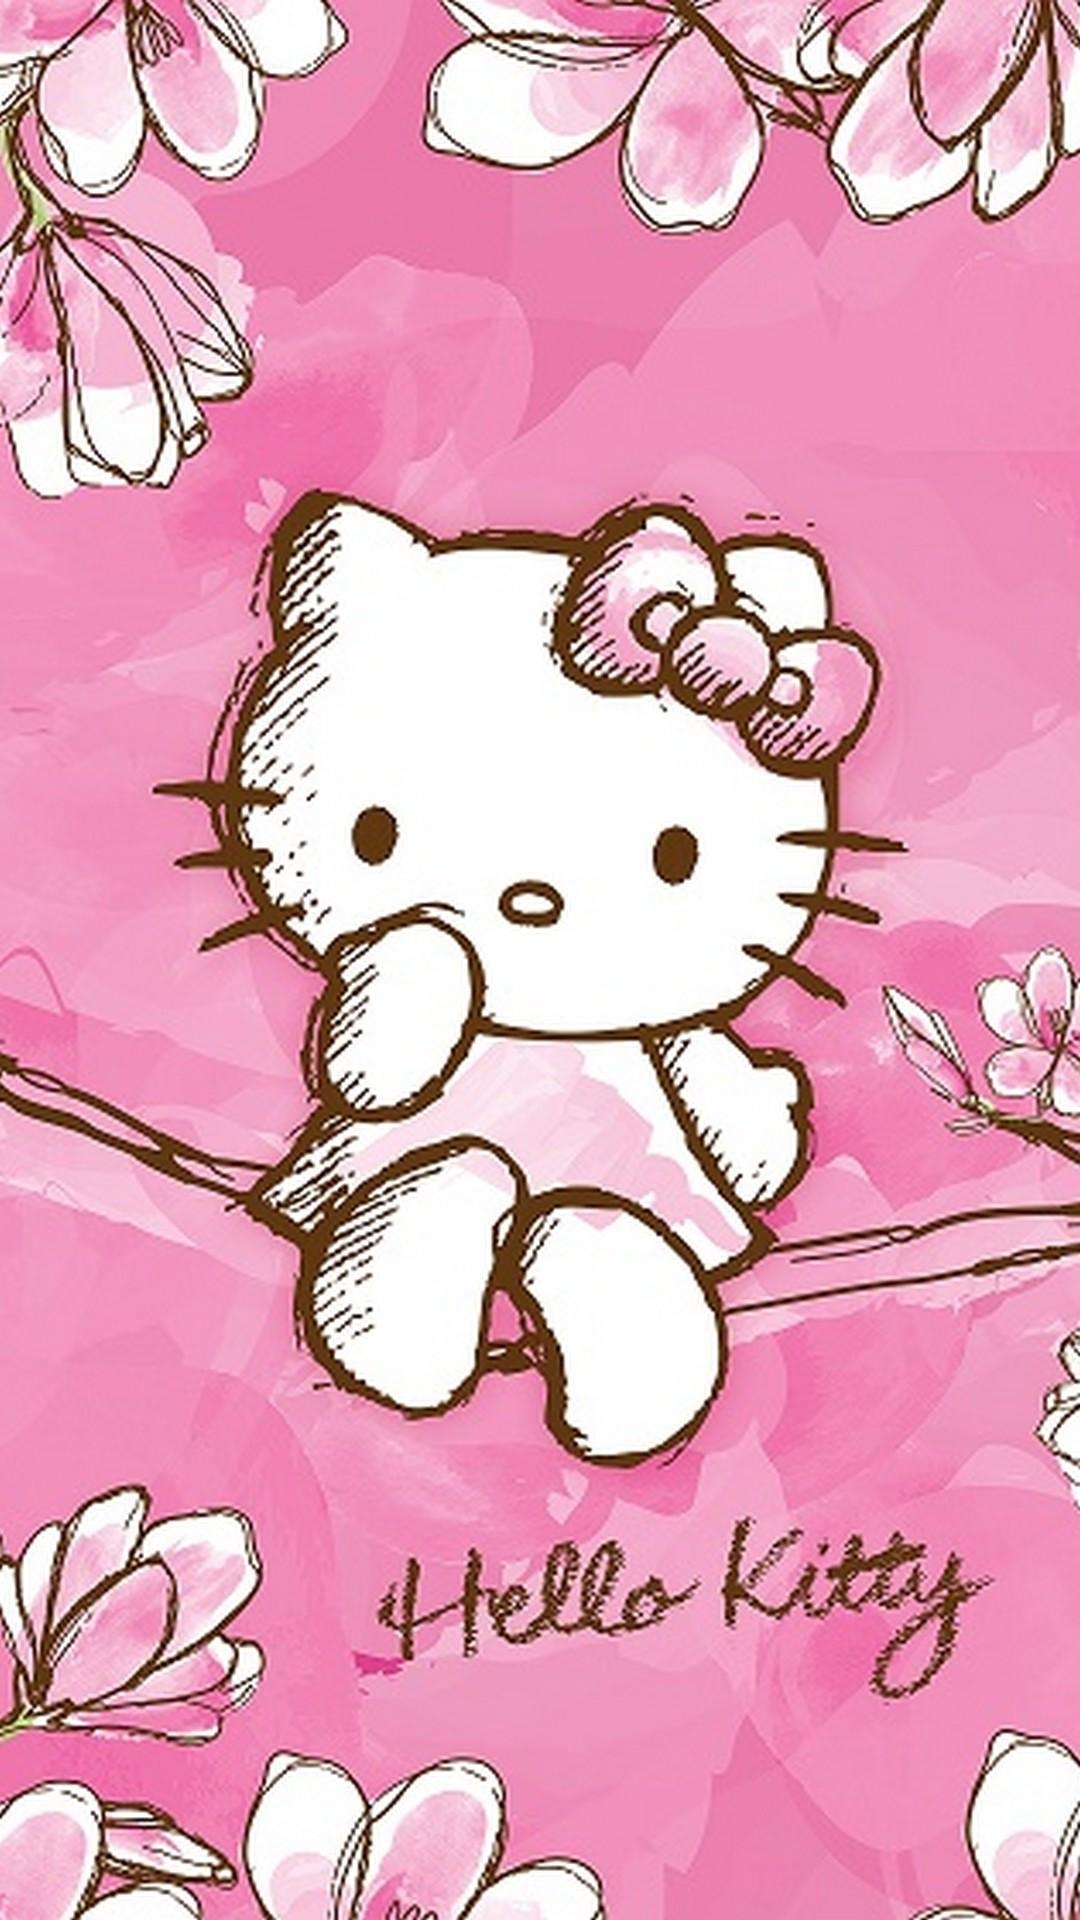 Hello Kitty: The character has a twin sister named Mimmy who wears a yellow bow on her right ear. 1080x1920 Full HD Wallpaper.